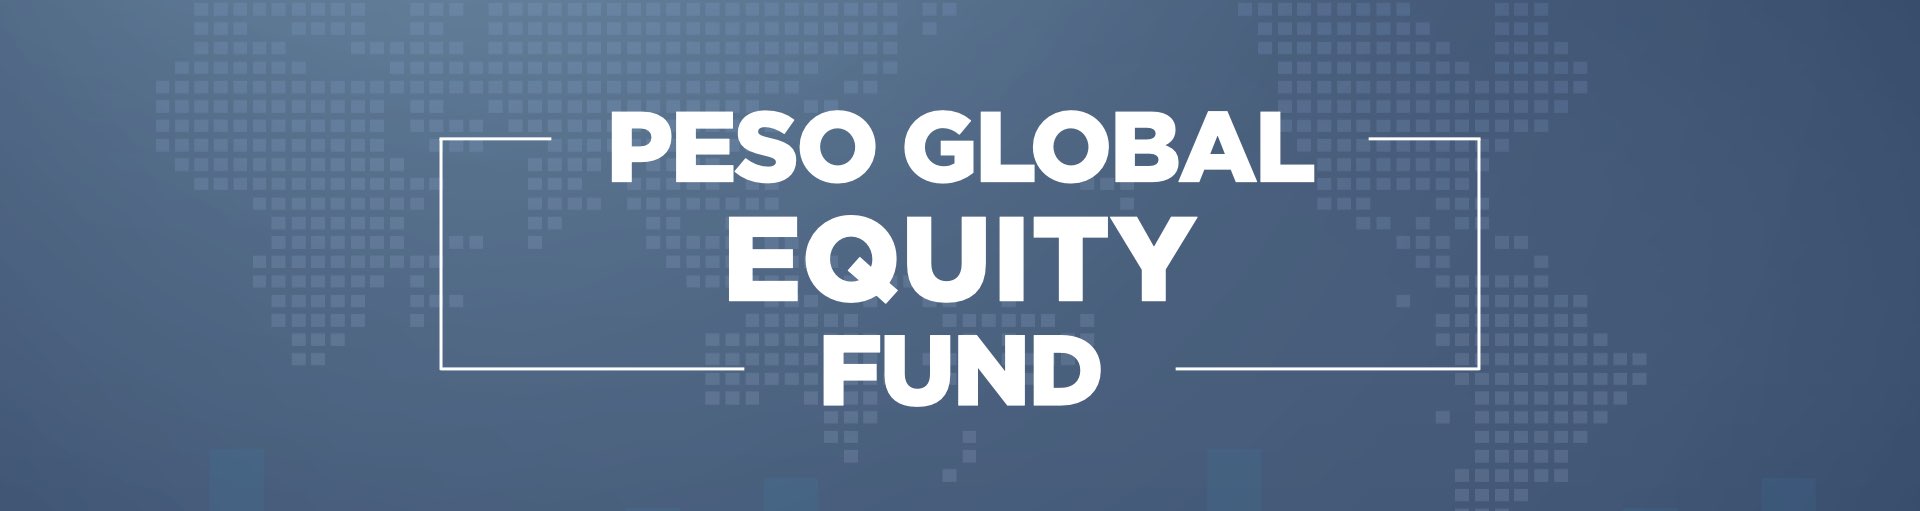 peso global technology fund banner